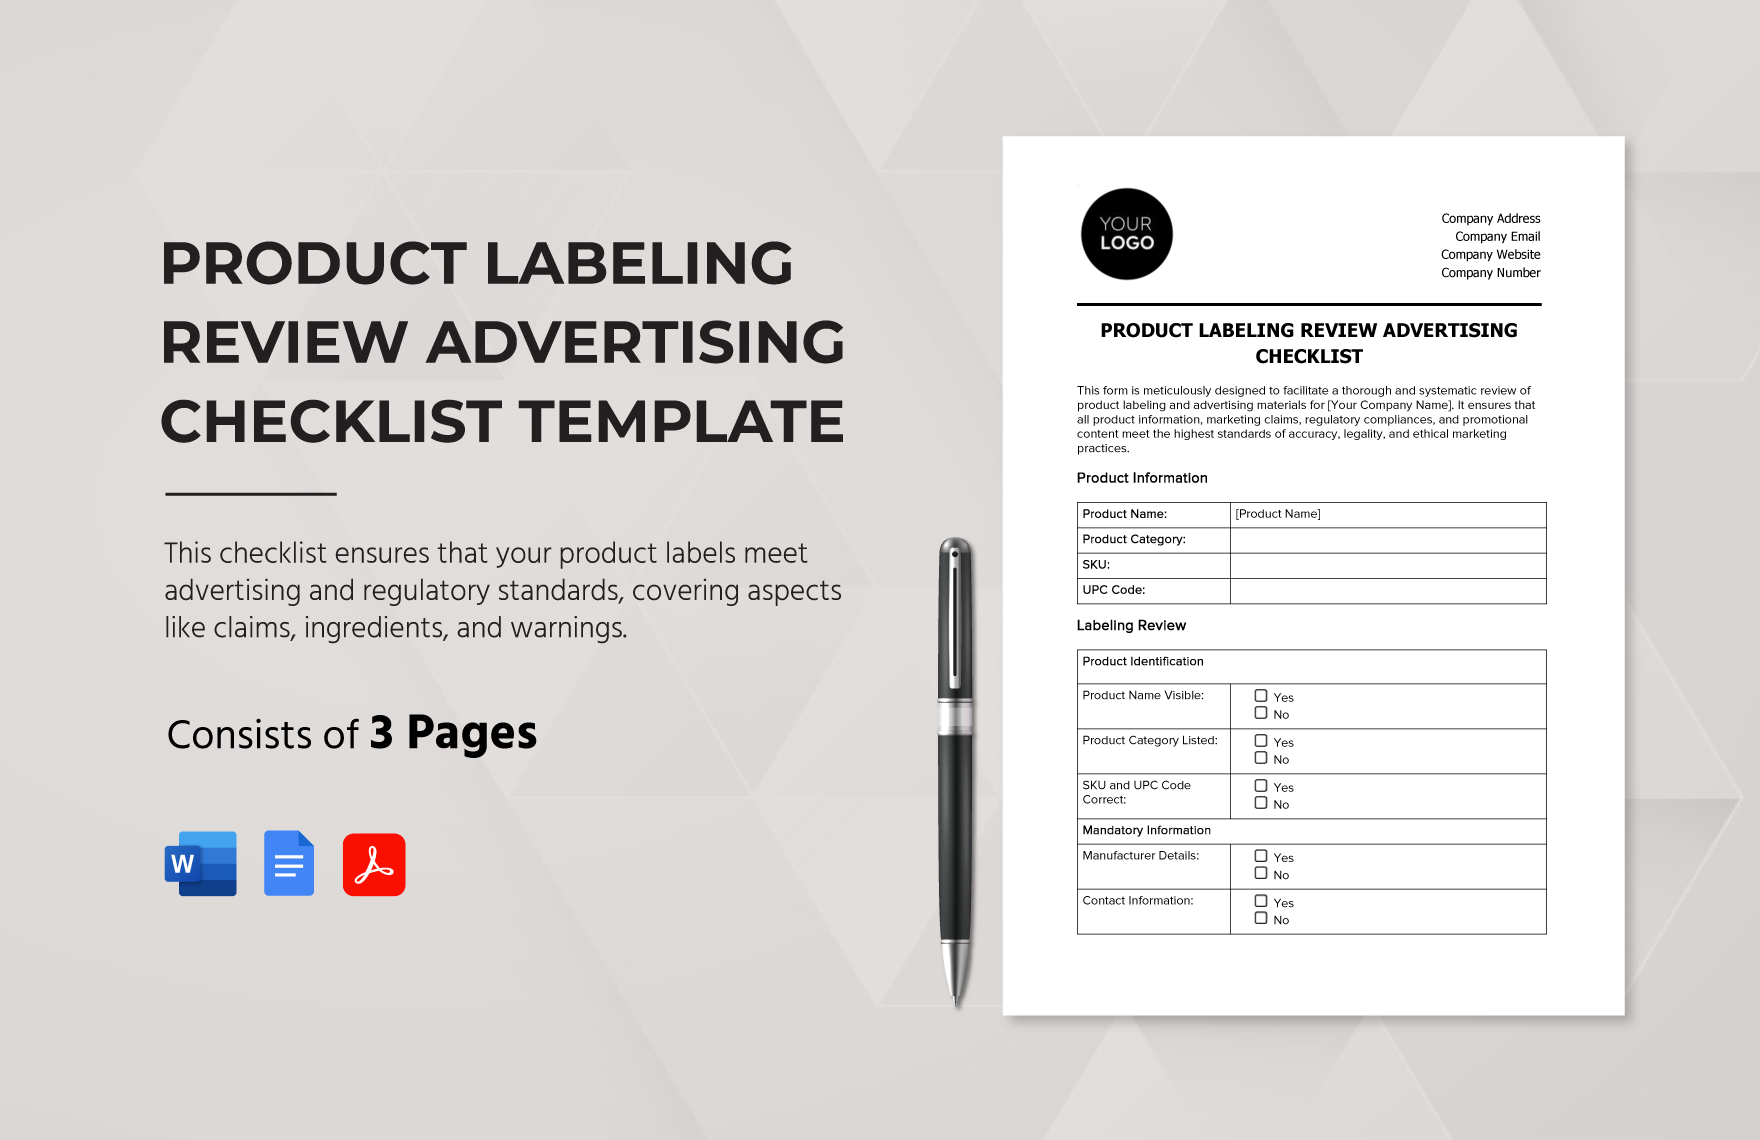 Product Labeling Review Advertising Checklist Template in Word, Google Docs, PDF